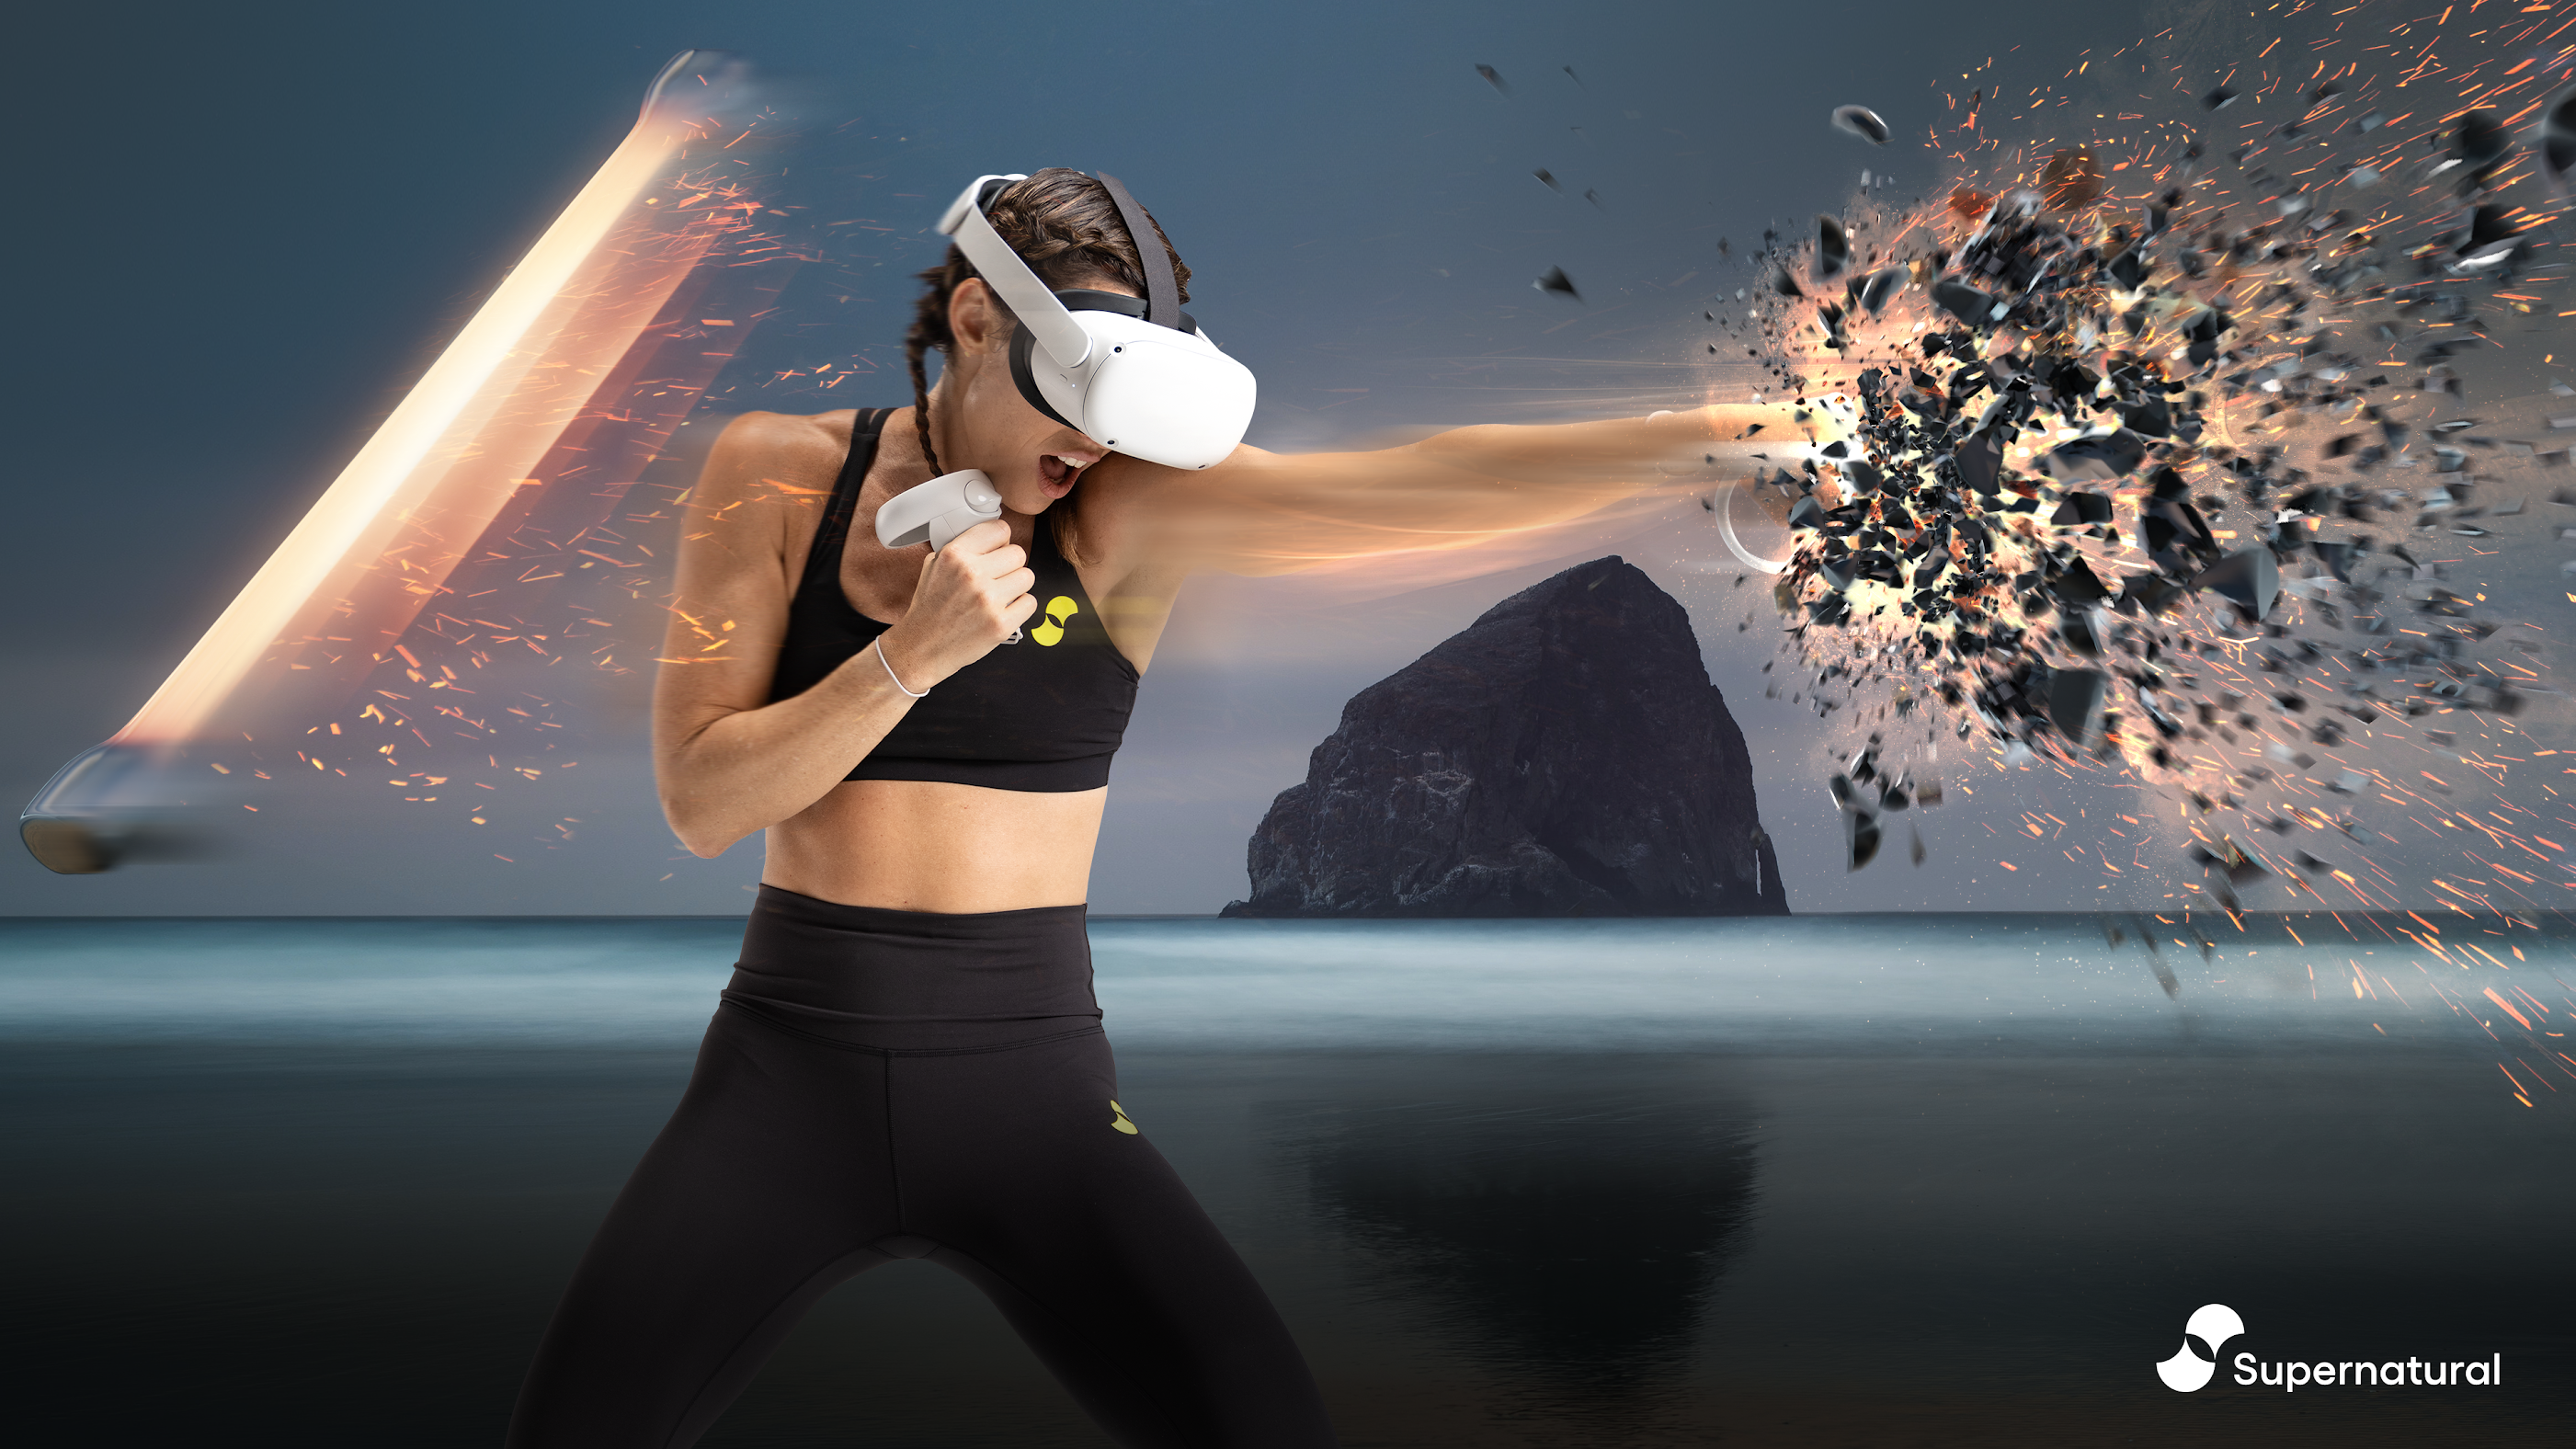 Site line cigar Atlantic FTC says Meta's Supernatural purchase could ruin the VR fitness market |  Ars Technica